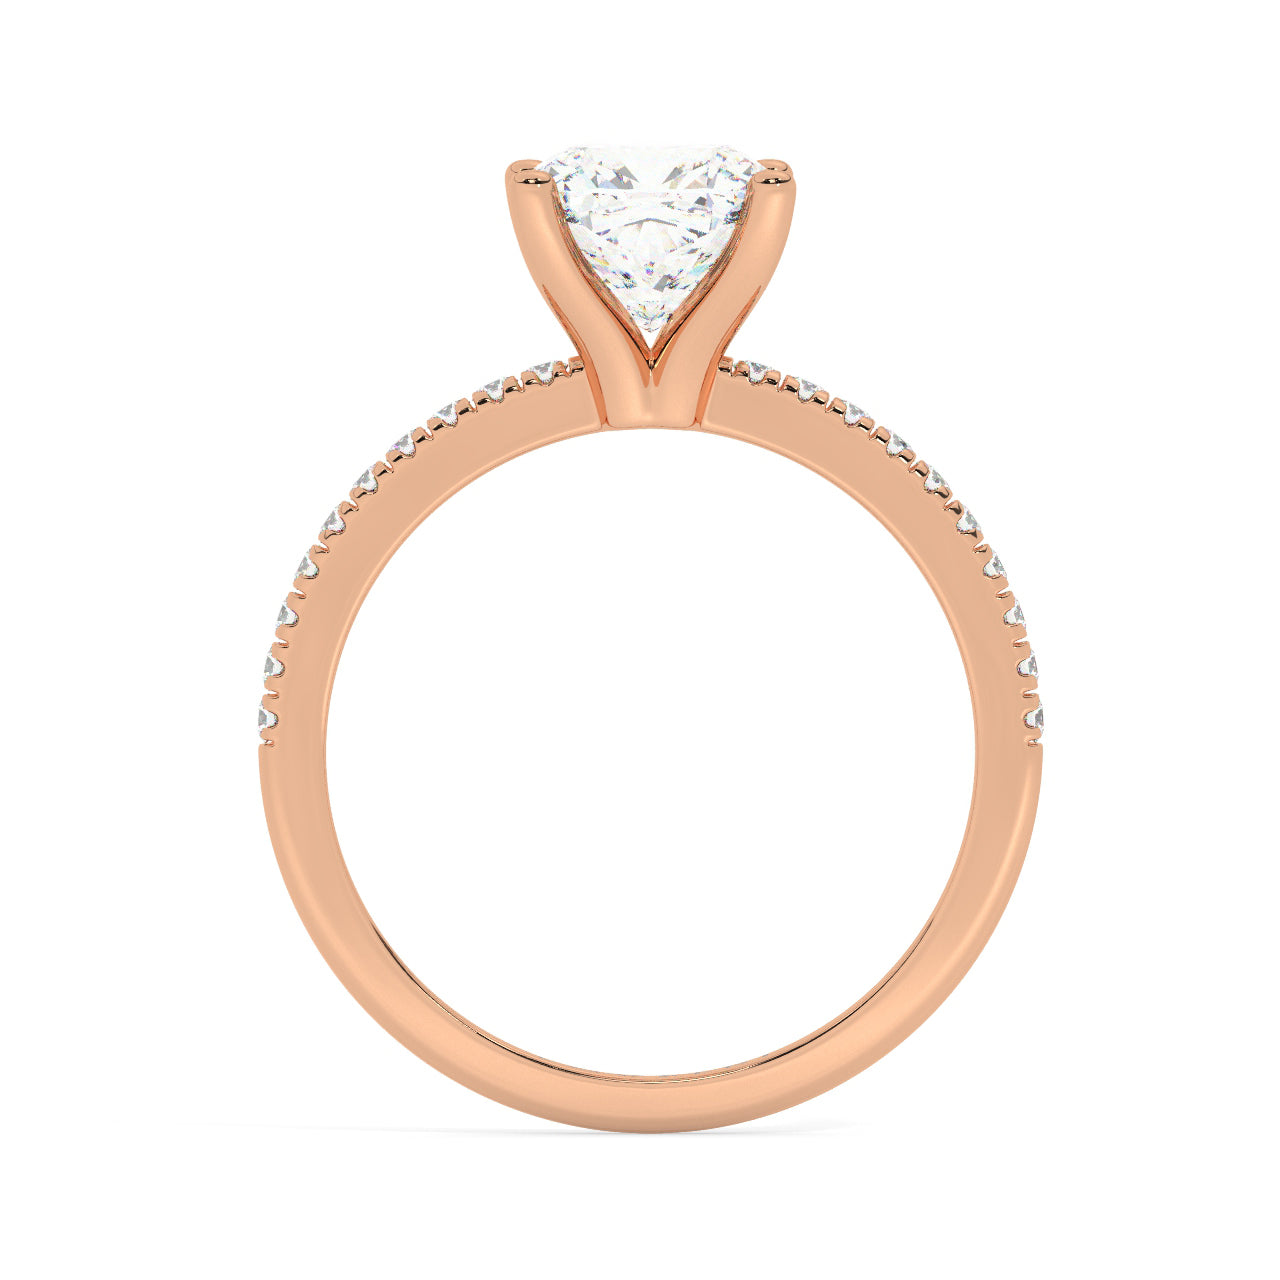 Round Cut Diamond Ring set on a Pavé Band in Rose Gold - Side View